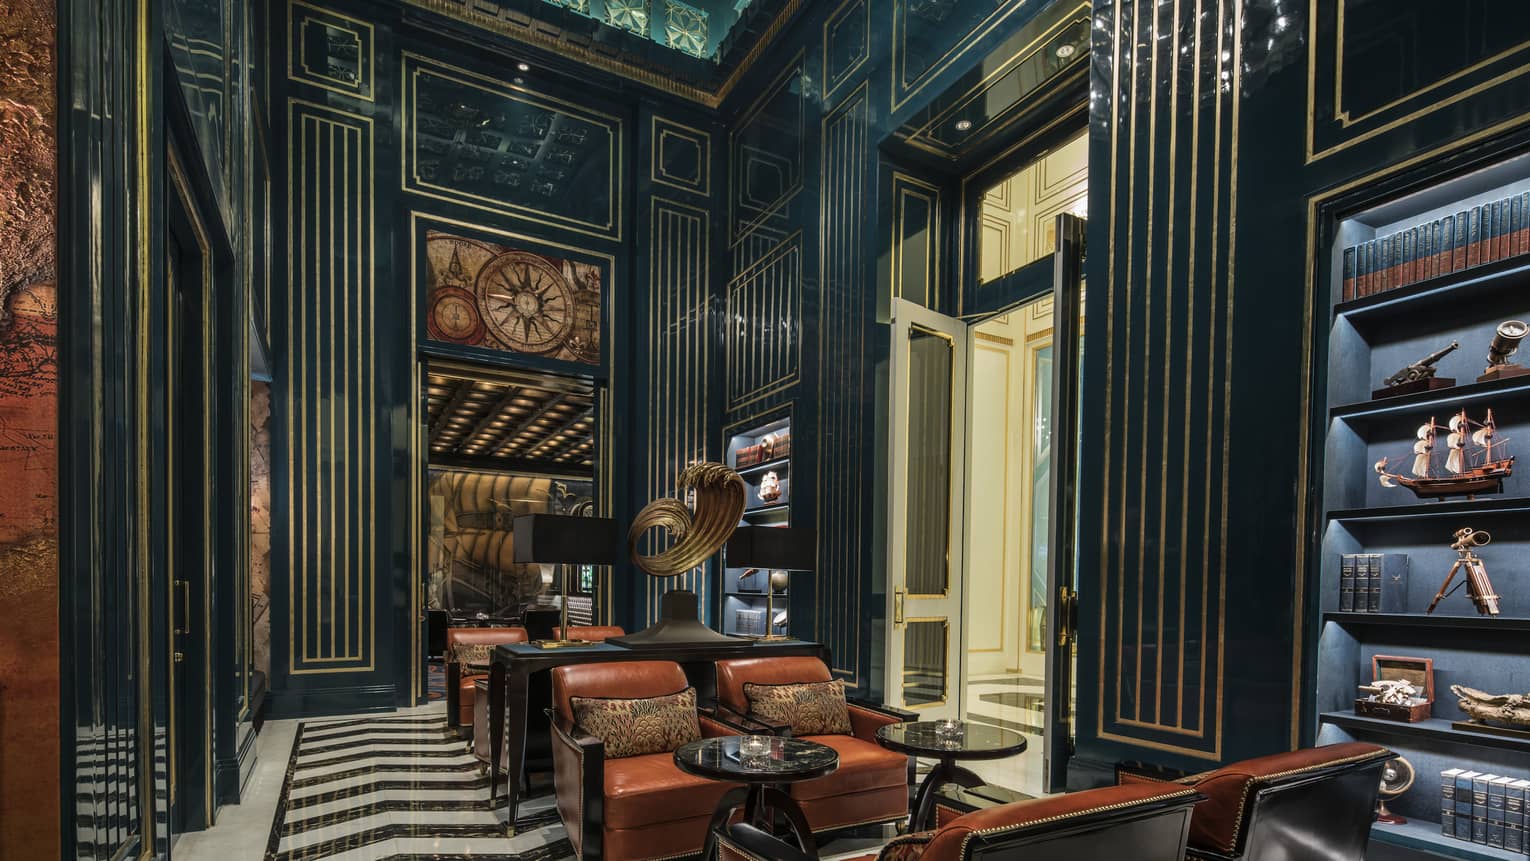 The Library lounge with high ceilings, navy blue and gold walls with antique map images, cocktail tables